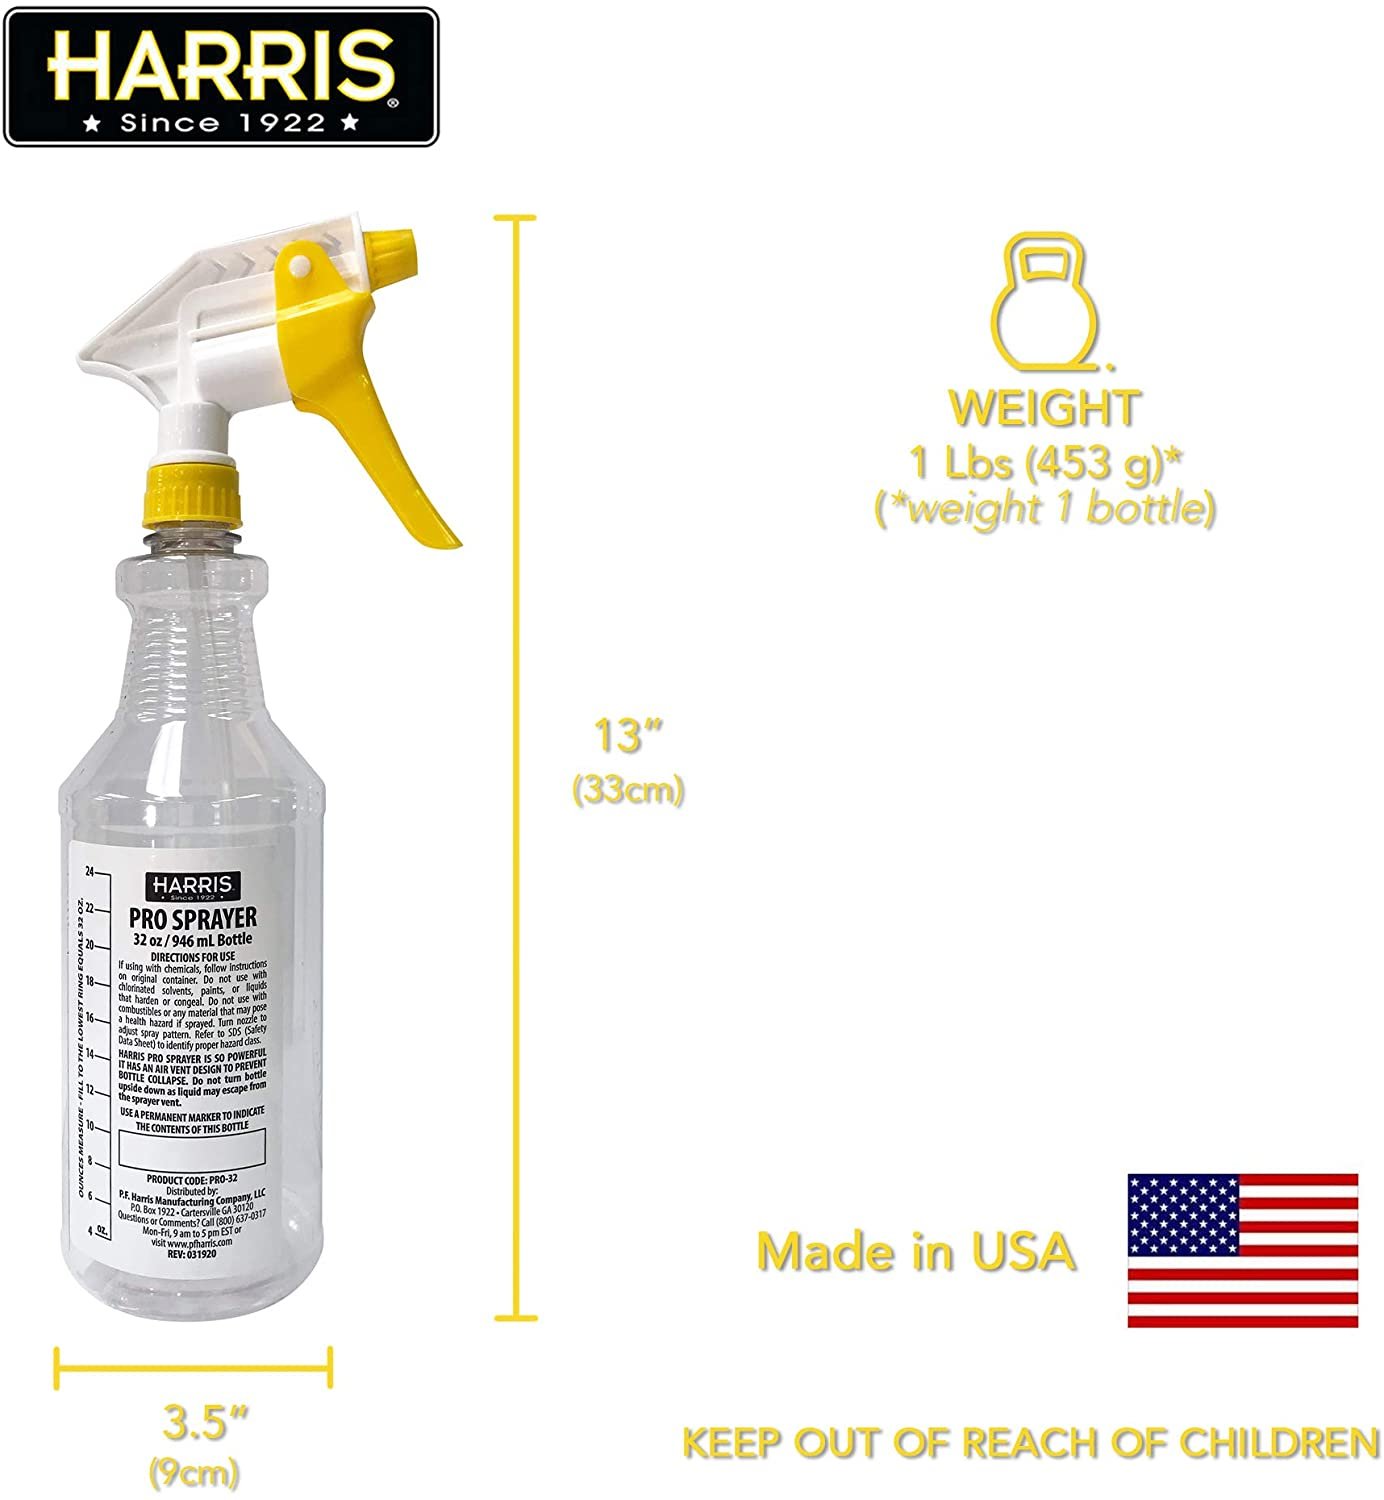 Harris Professional Spray Bottle 32oz 3-Pack, All-Purpose with Clear  Finish, Pressurized Sprayer, Adjustable Nozzle and Measurements 